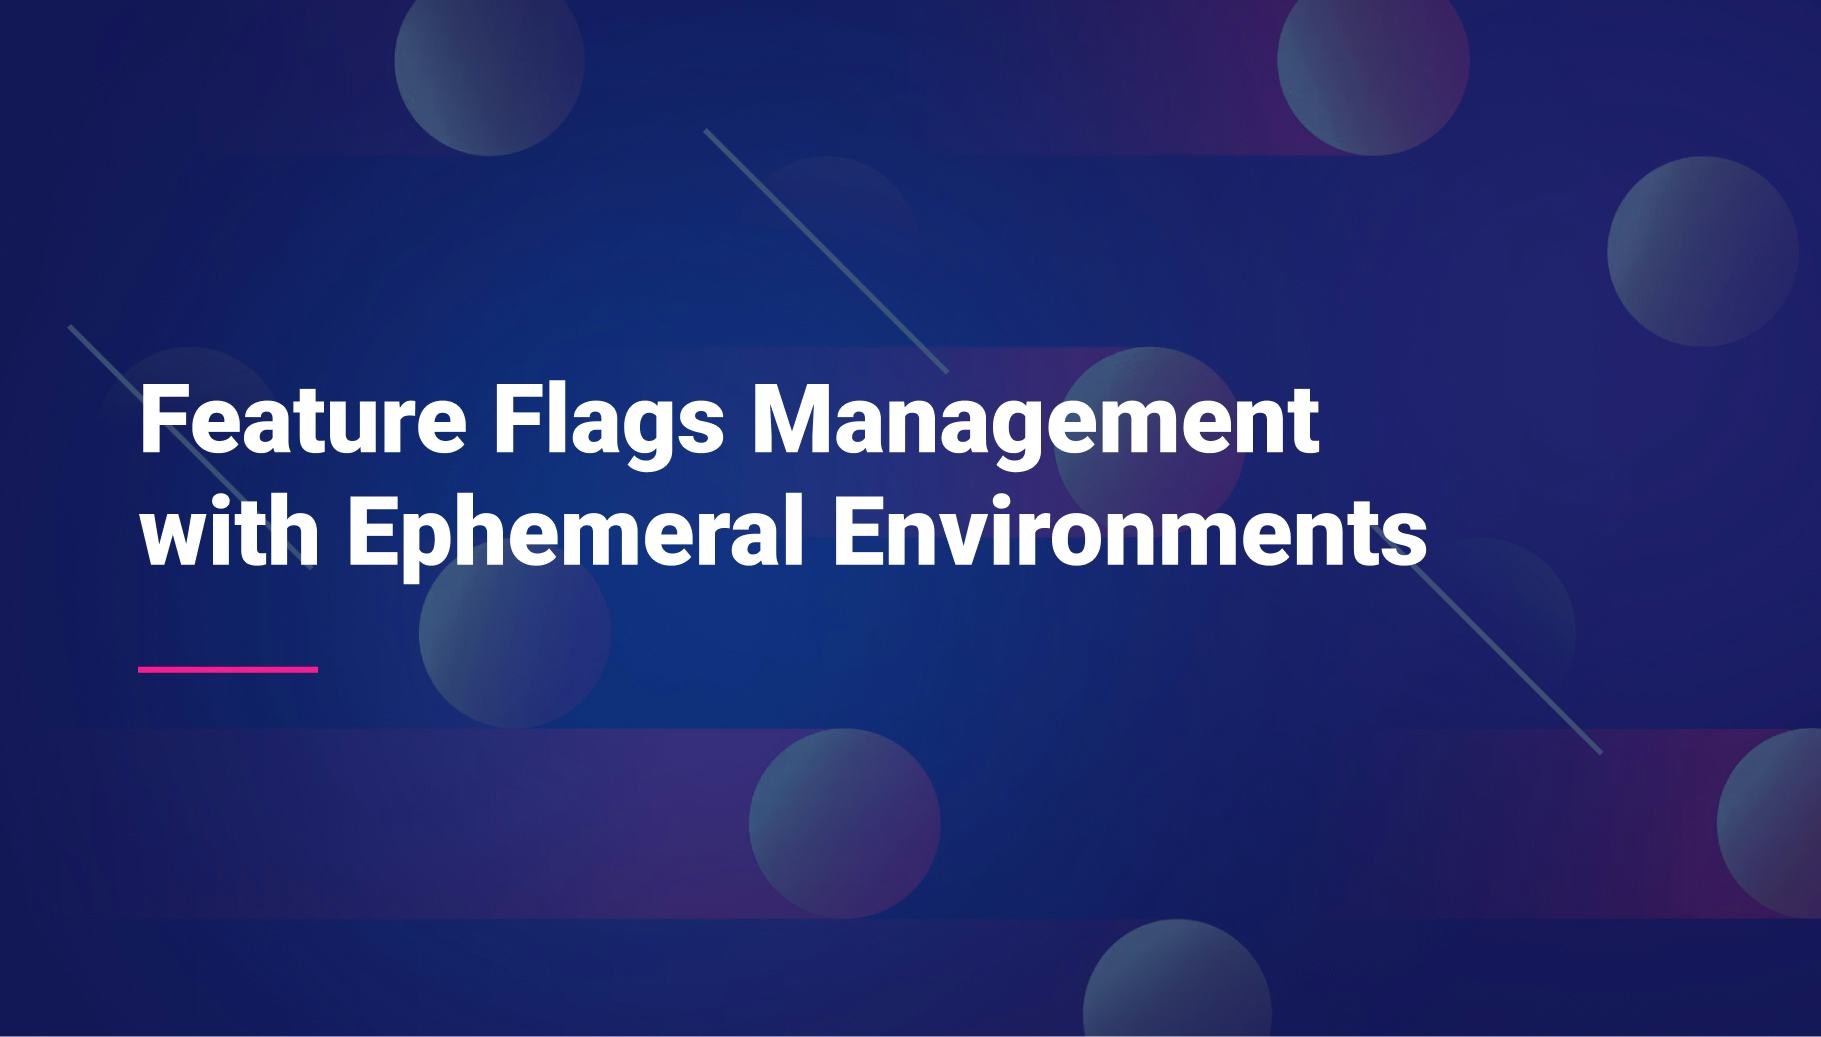 Feature Flags Management with Ephemeral Environments